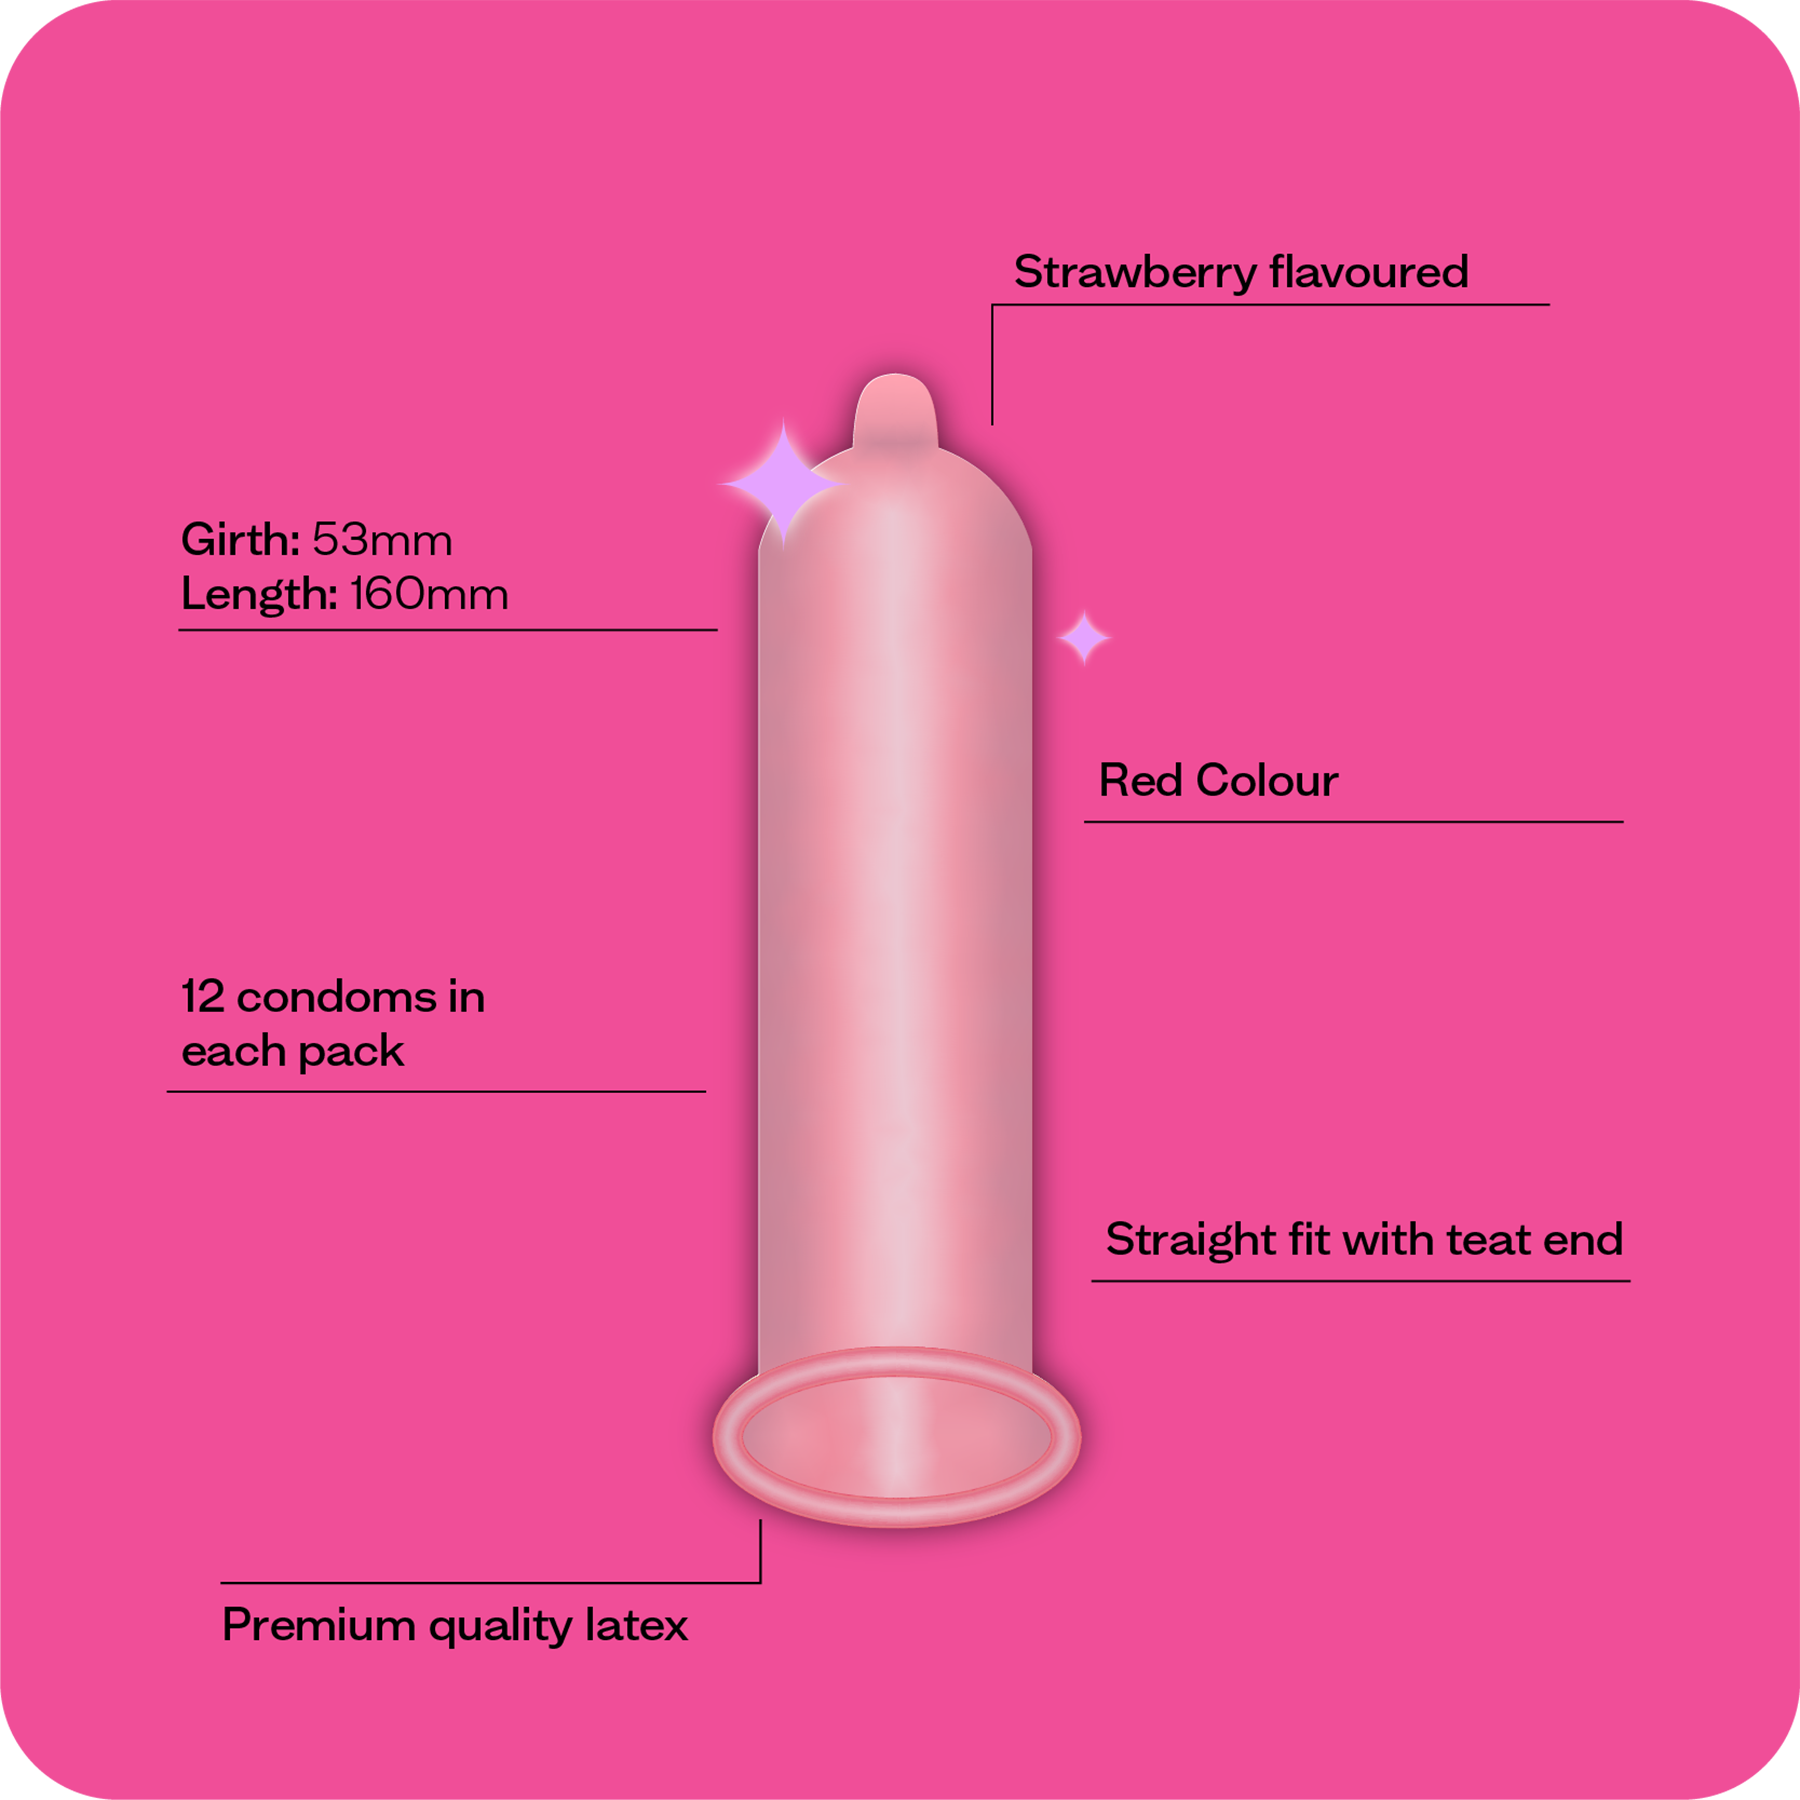 Illustration with key features of Moments Strawberry flavoured condom